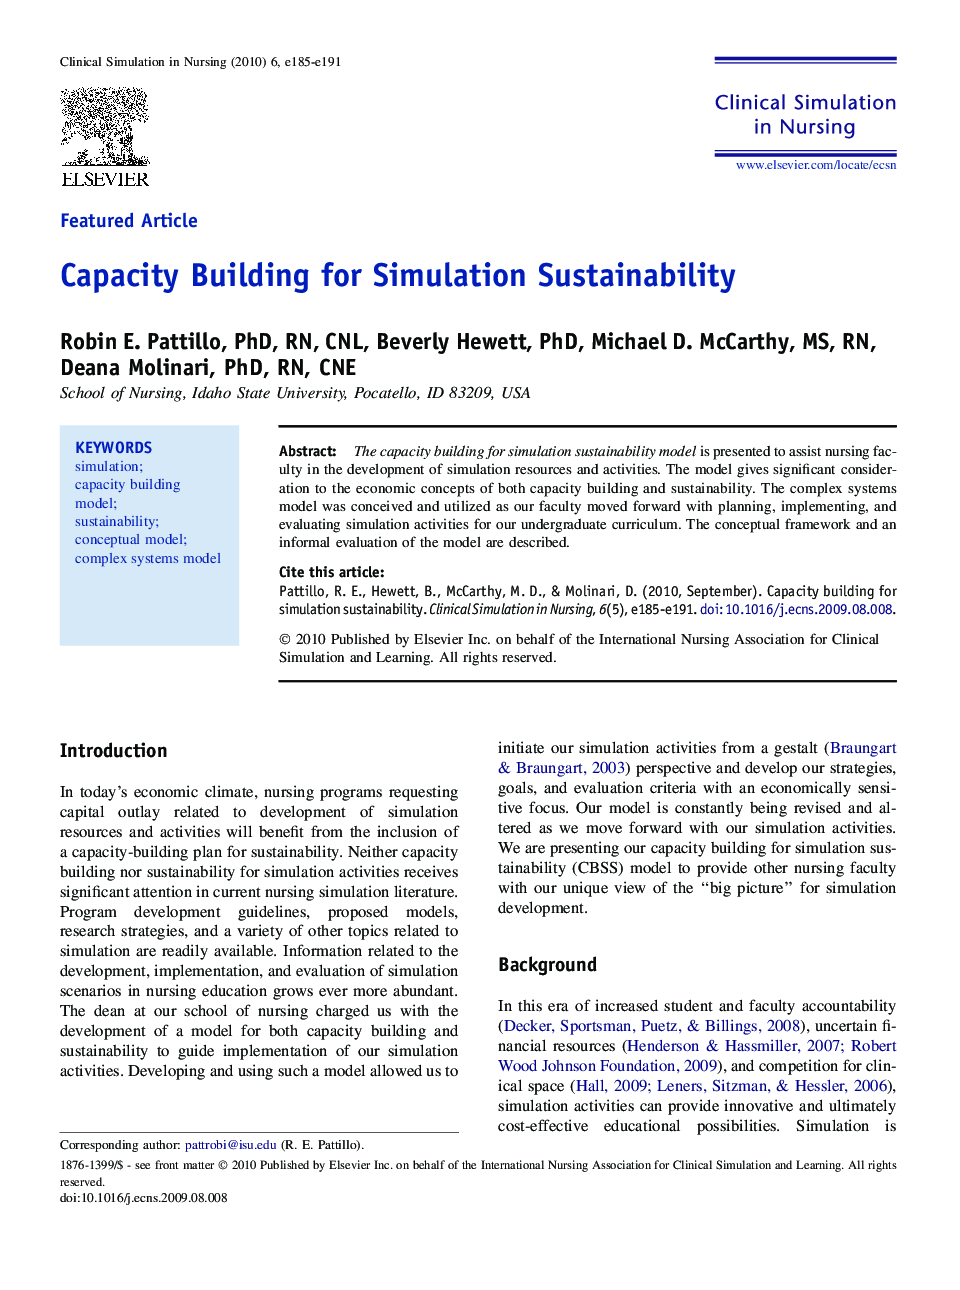 Capacity Building for Simulation Sustainability